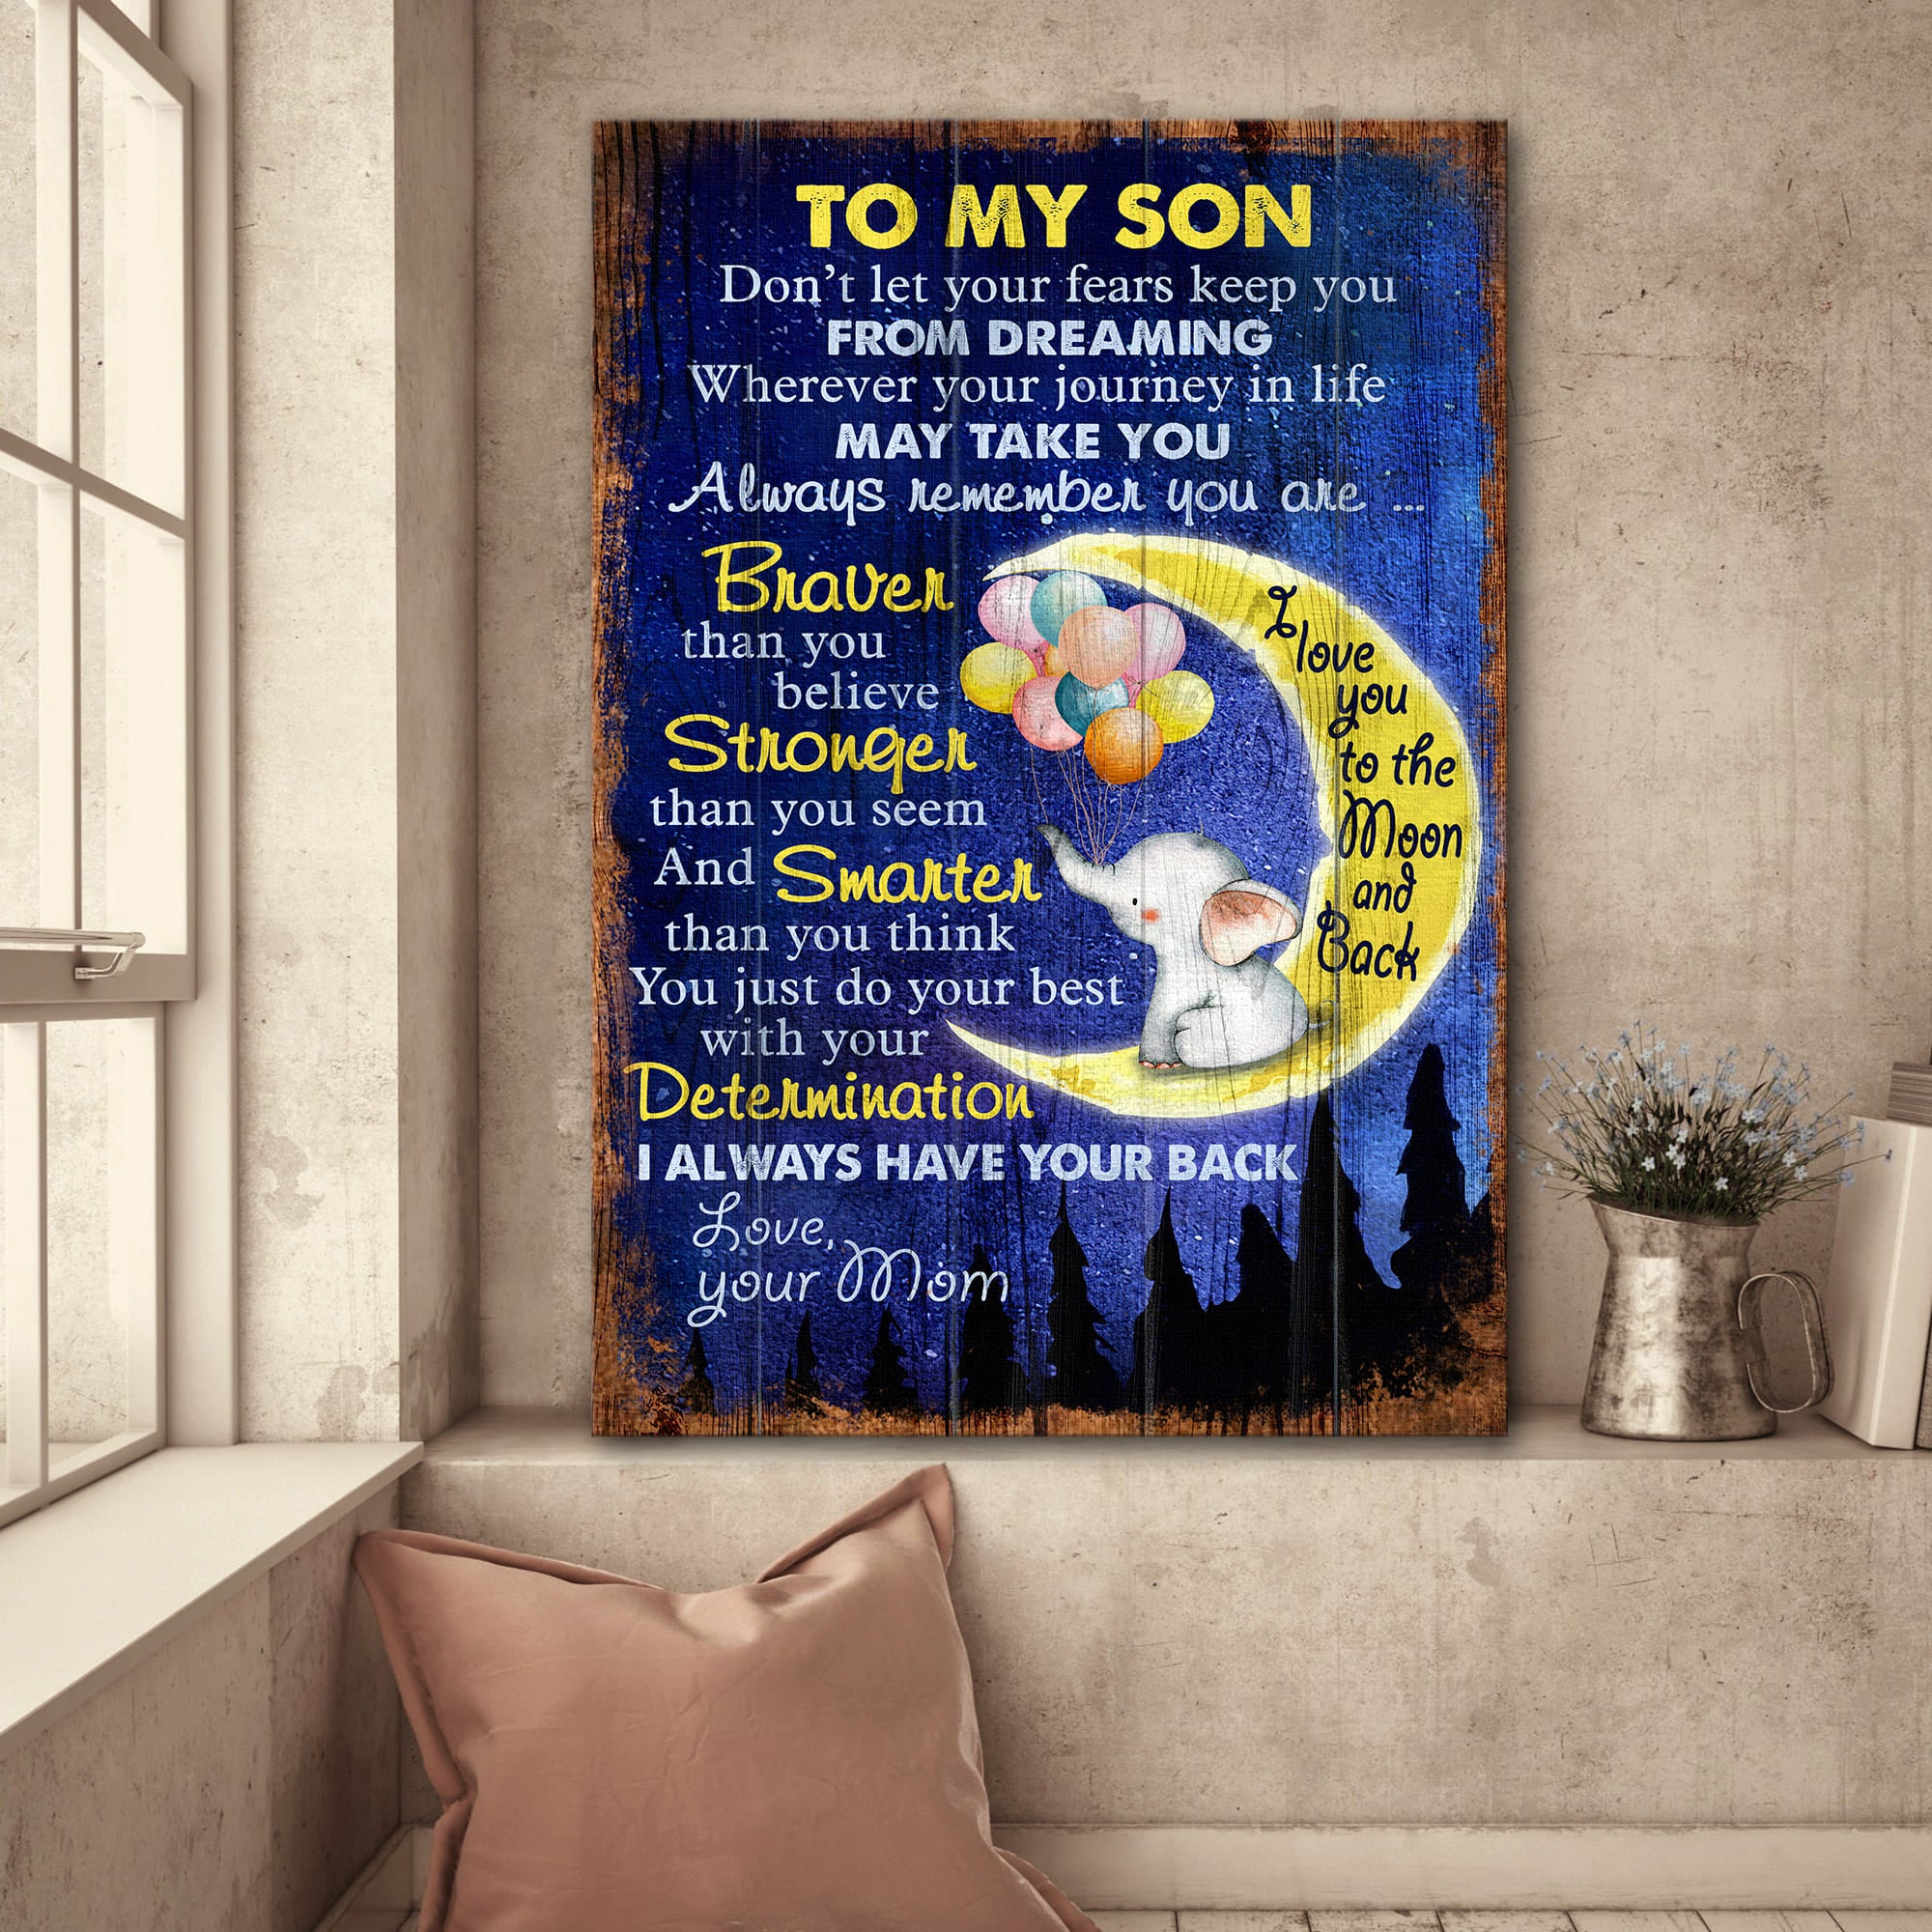 Mom to son, Elephant, Moon, Balloons, I love you to the moon and back - Family Portrait Canvas Prints, Wall Art